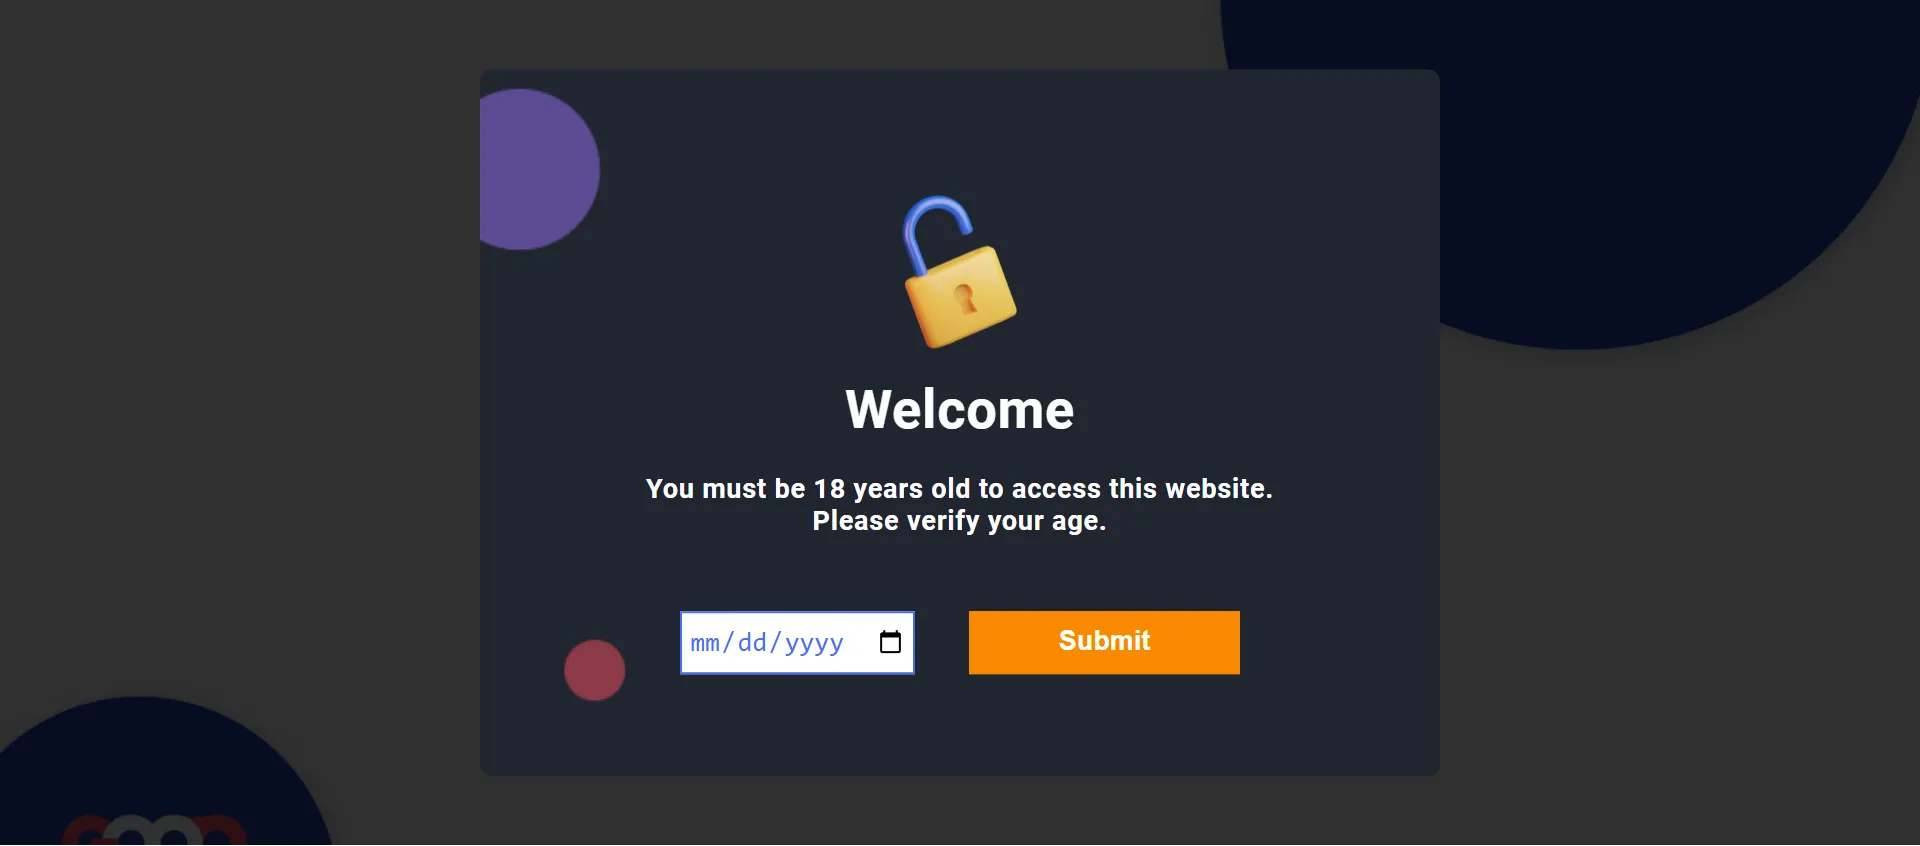 How to Add Age Verification to Shopify [+5 Apps] | 2023